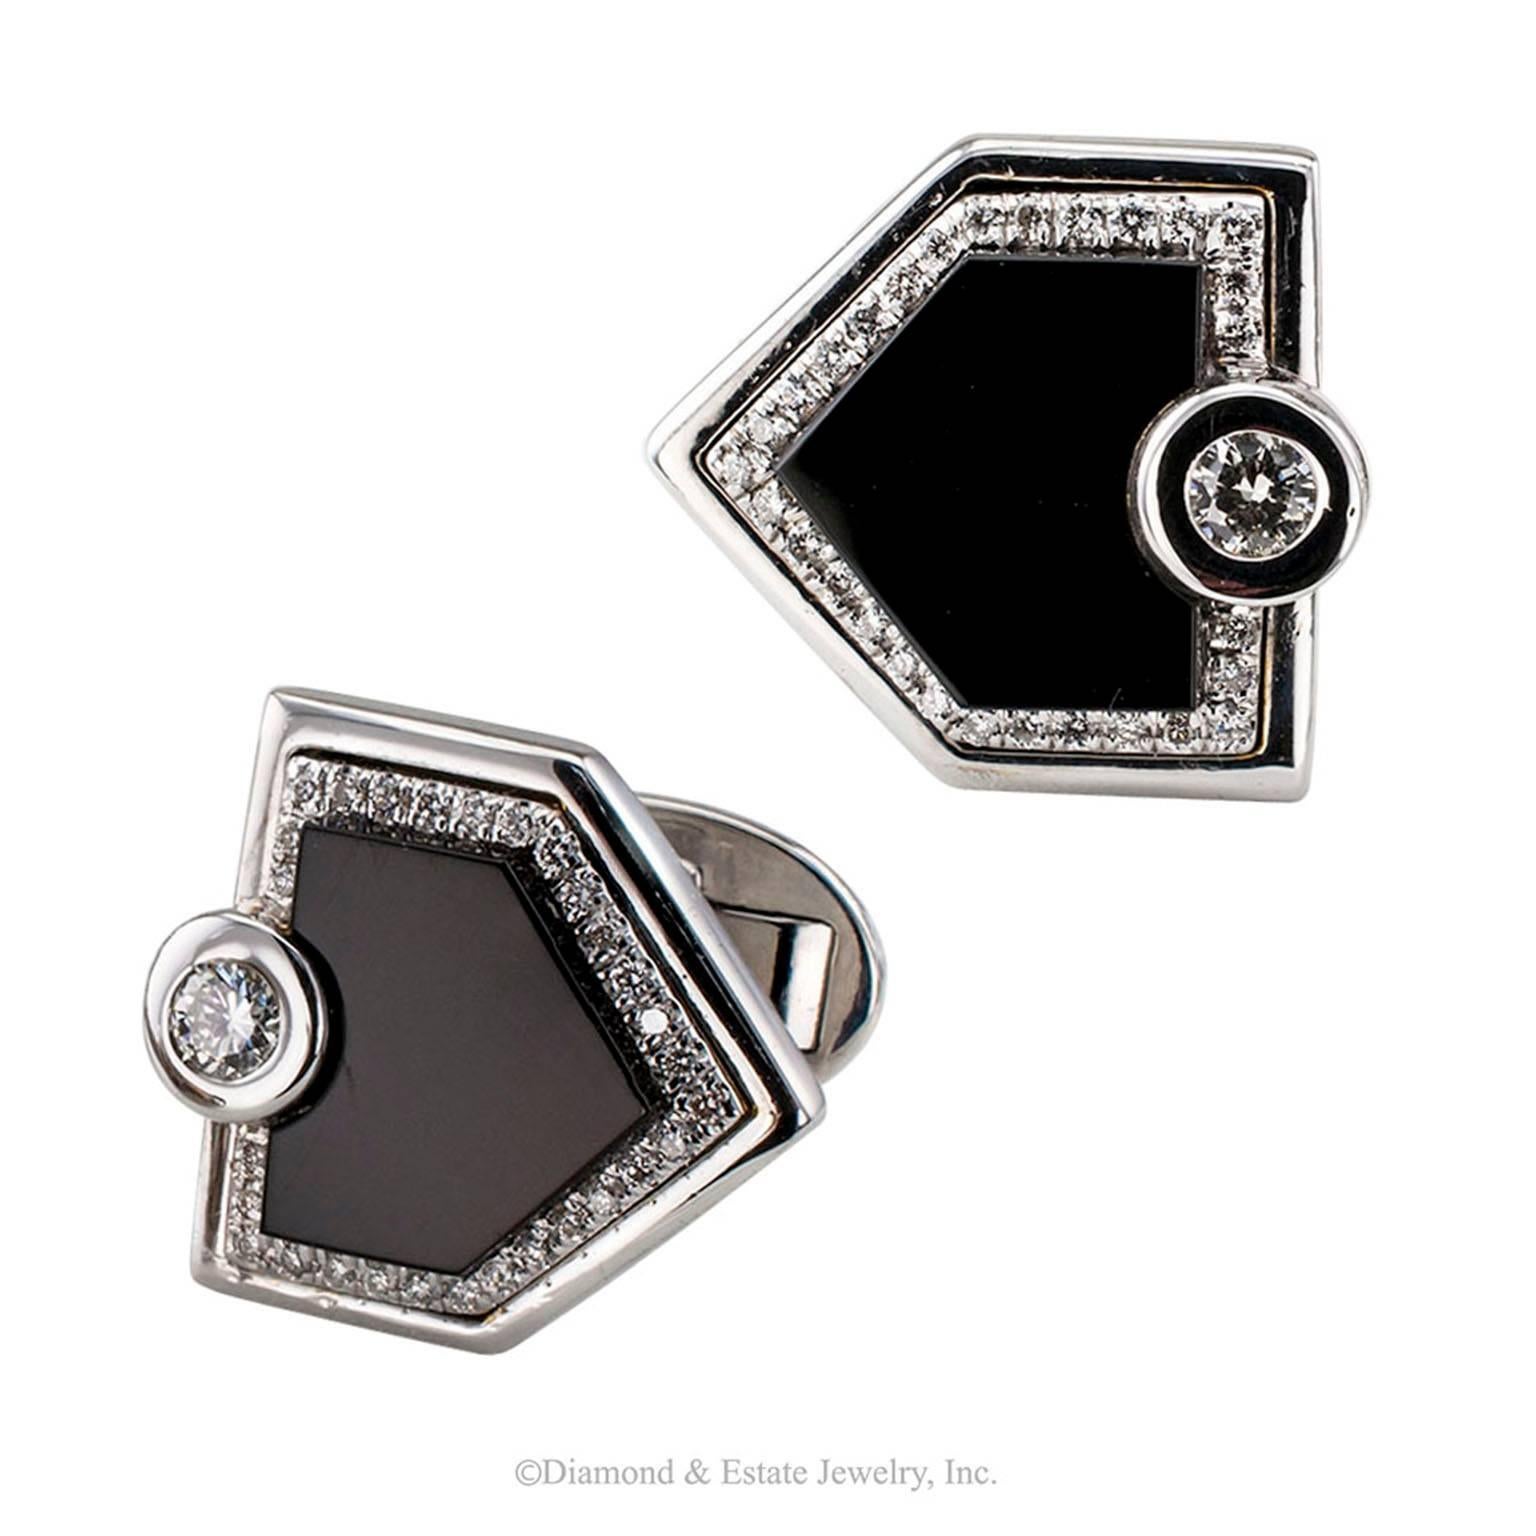 Onyx Chevron Diamond Gold Cuff Links

Black onyx chevron and 0.50 carat diamonds gold estate cuff links.  Centering a black onyx chevron motif set sideways, within a conforming border of round brilliant-cut diamonds completed by a larger, bezel-set,